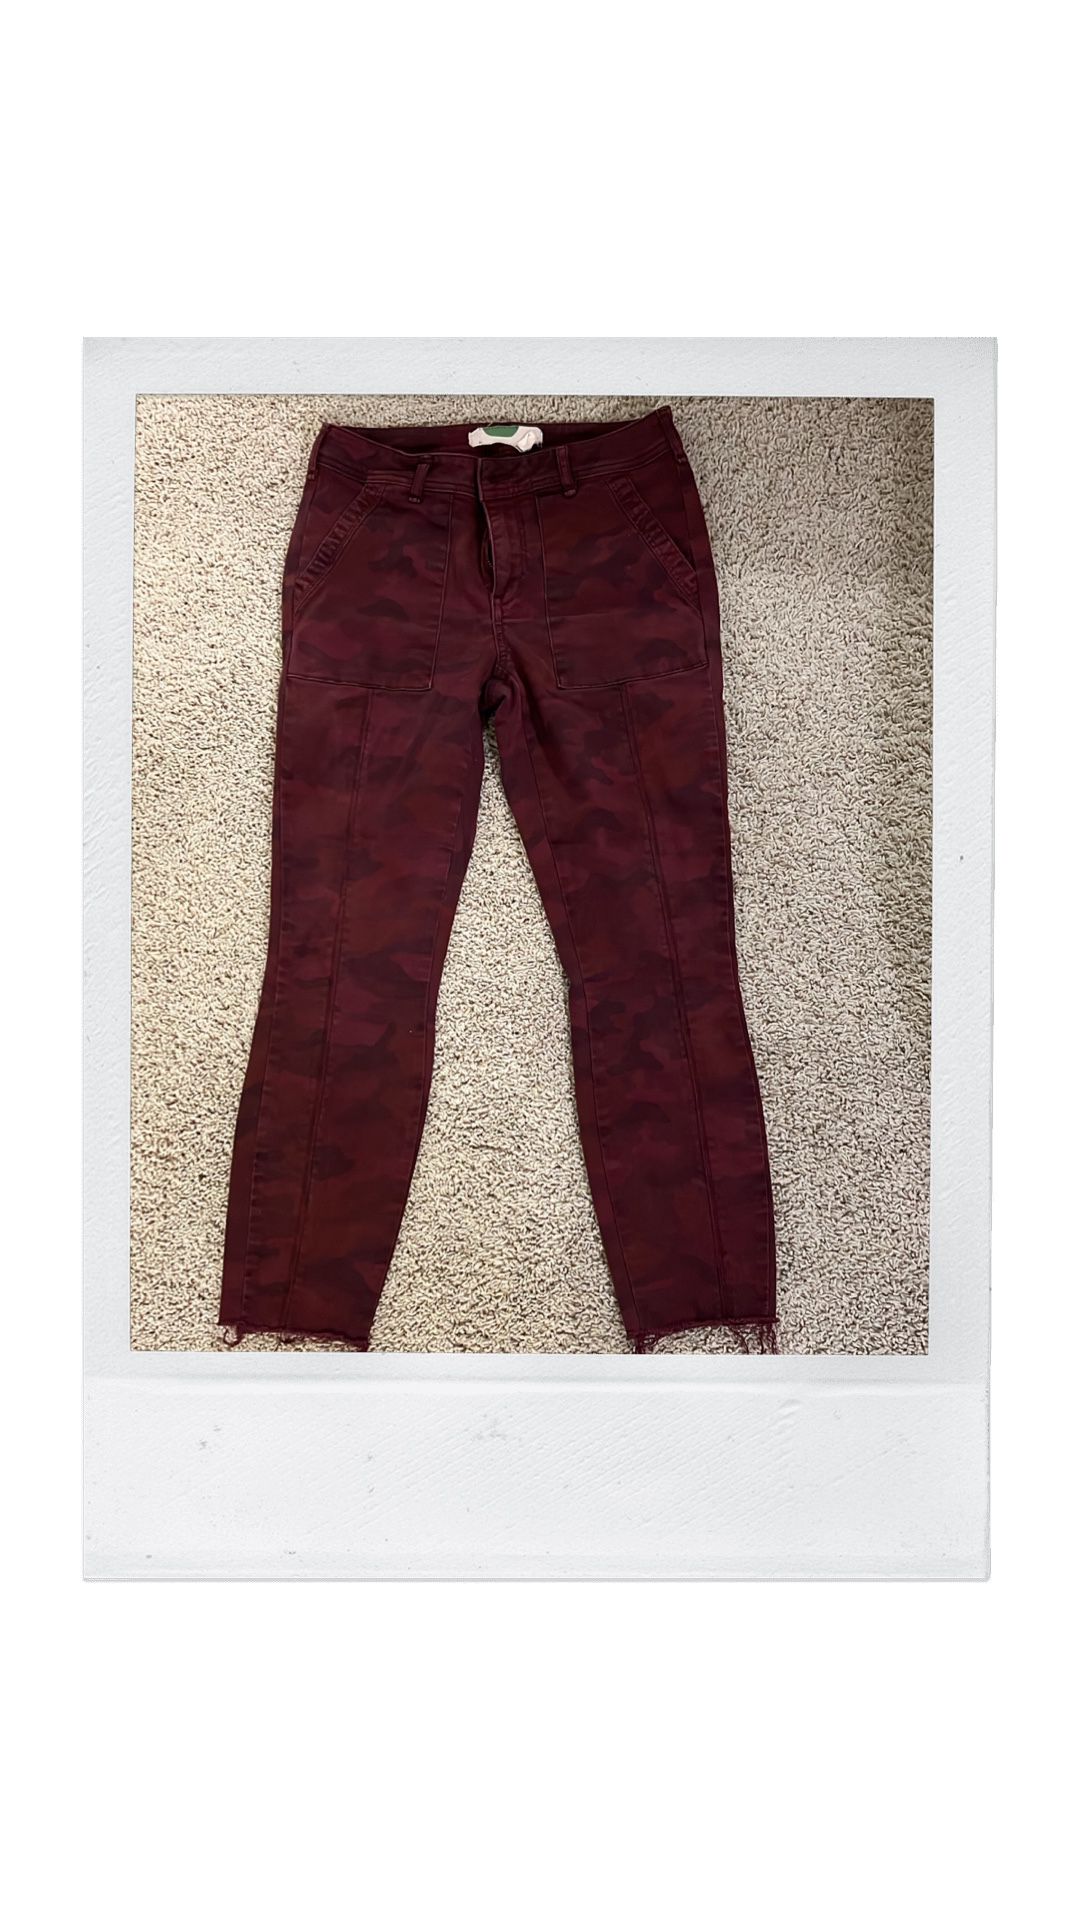 Anthropologie Maroon Camo Cropped Pants 27